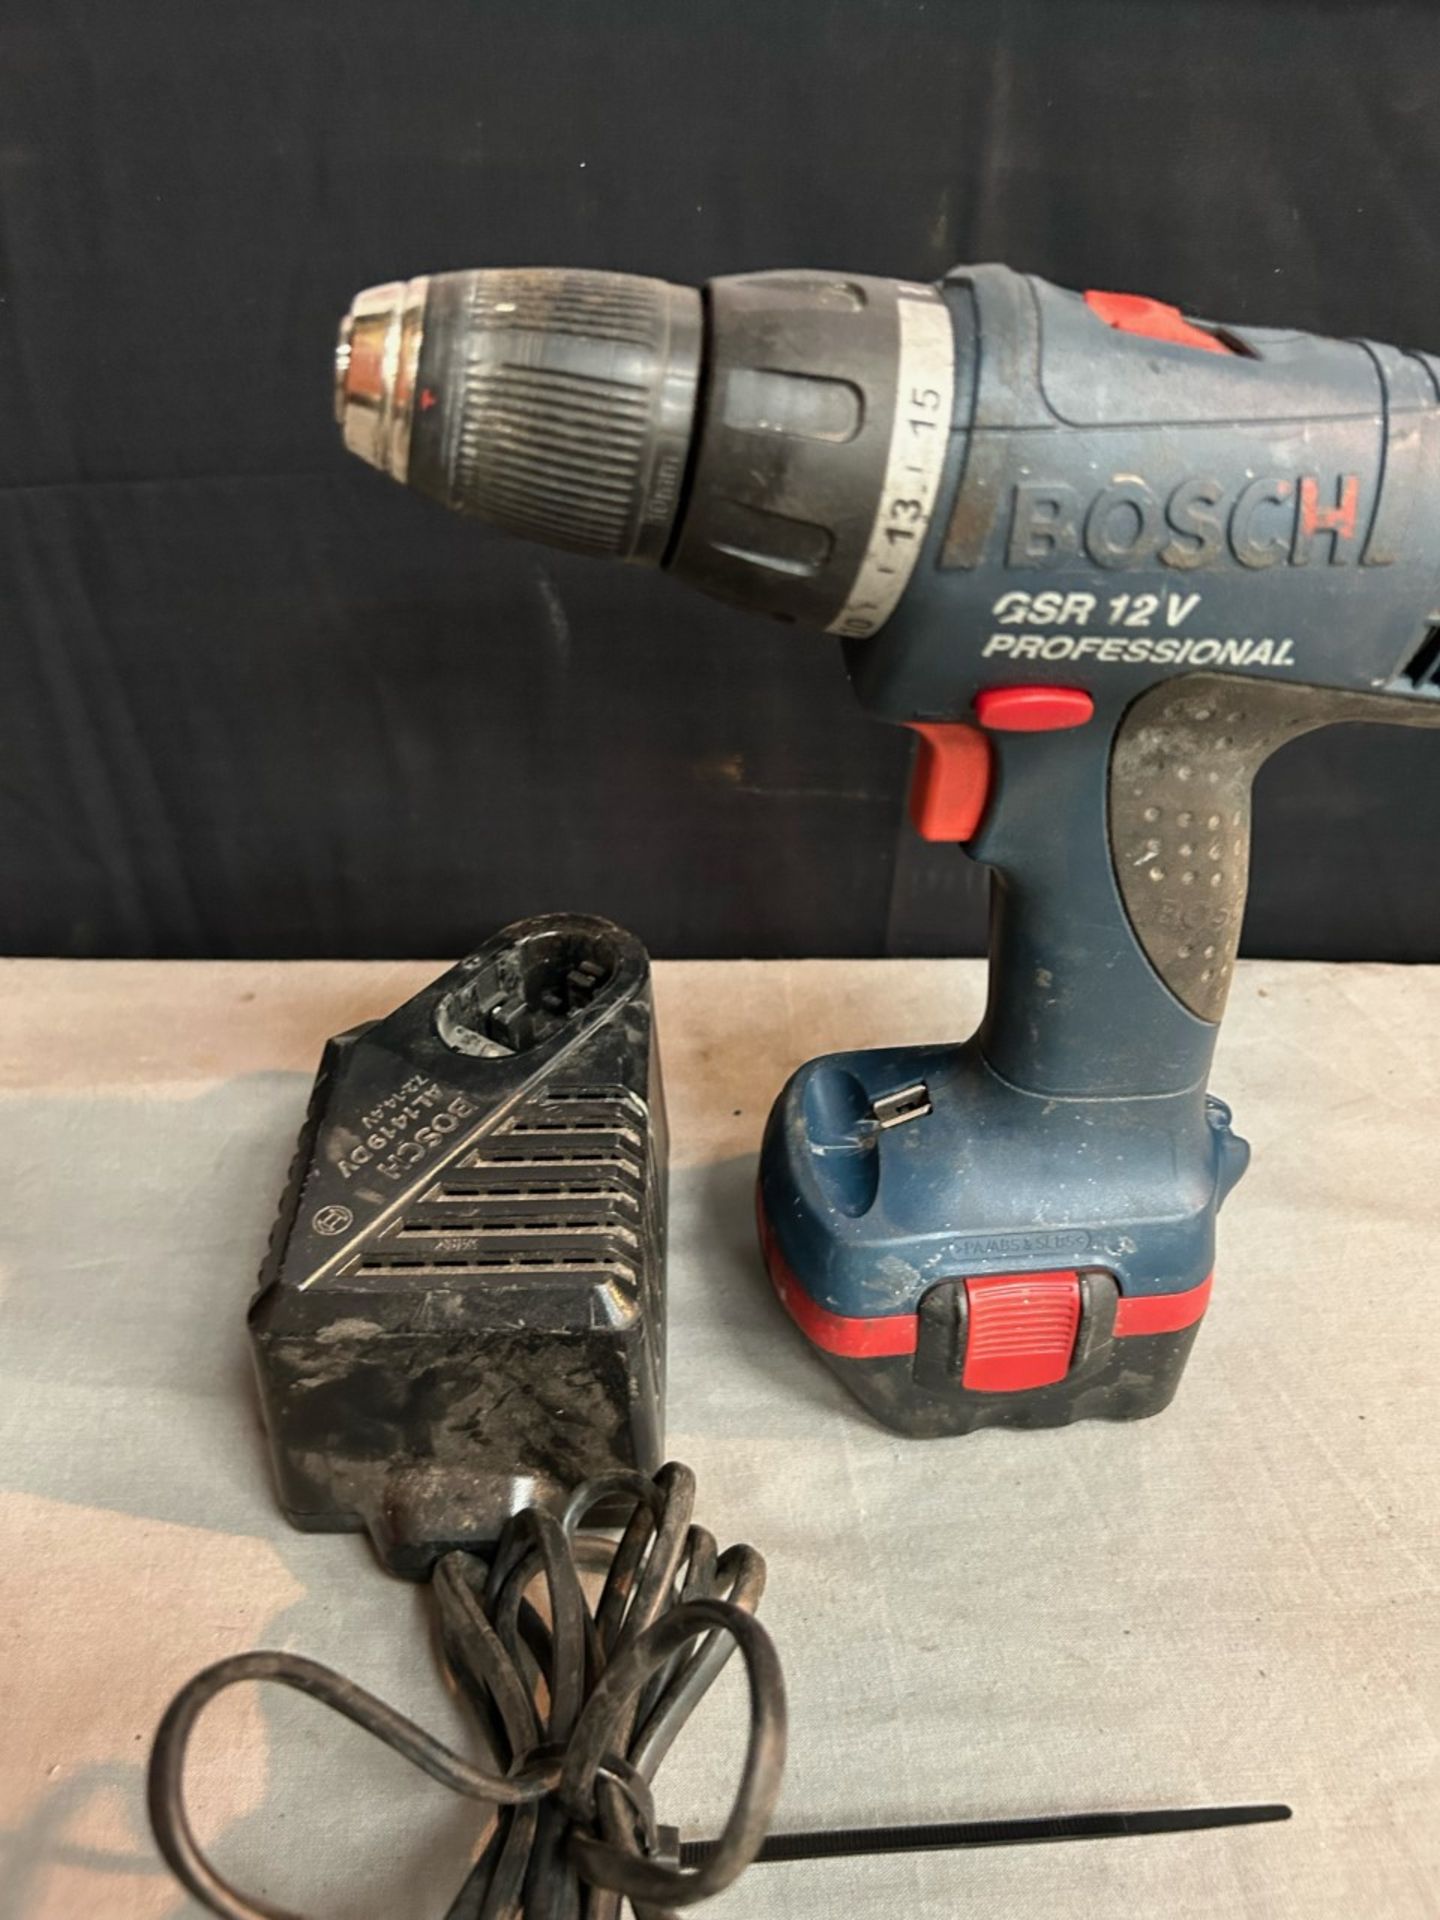 Bosch 12v power drill with battery and charger. Good condition, full working order as seen in video - Bild 2 aus 2